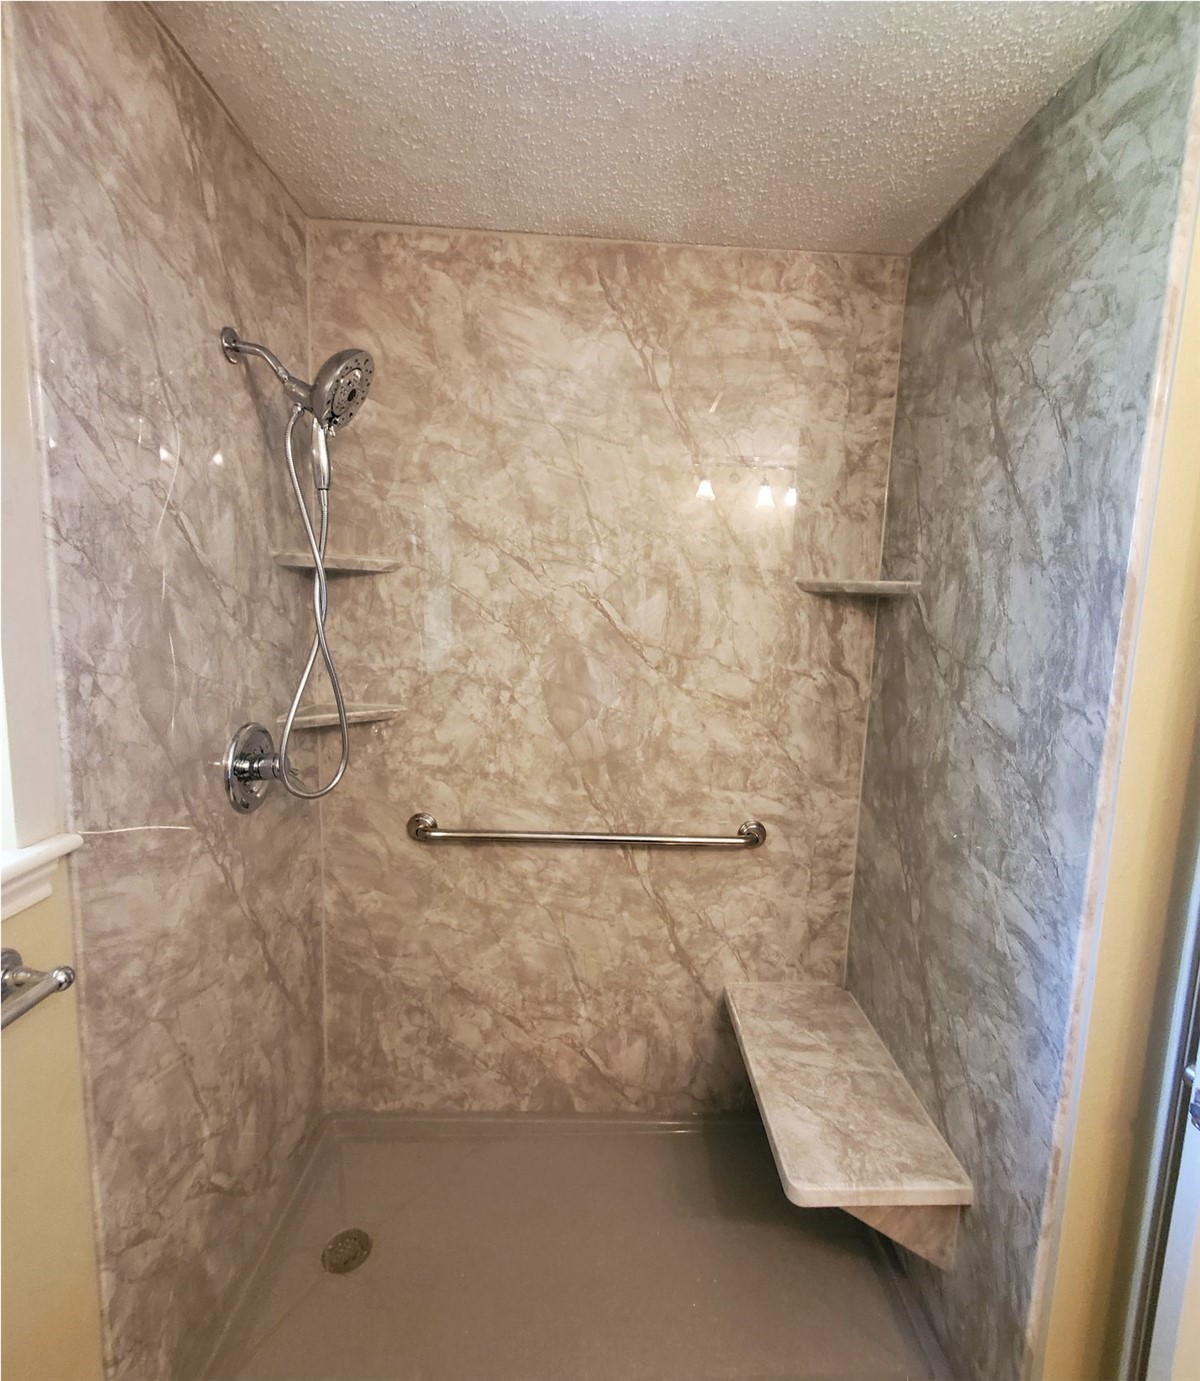 The Benefits of Converting your Old Bathtub into a Beautiful Walk In Shower!